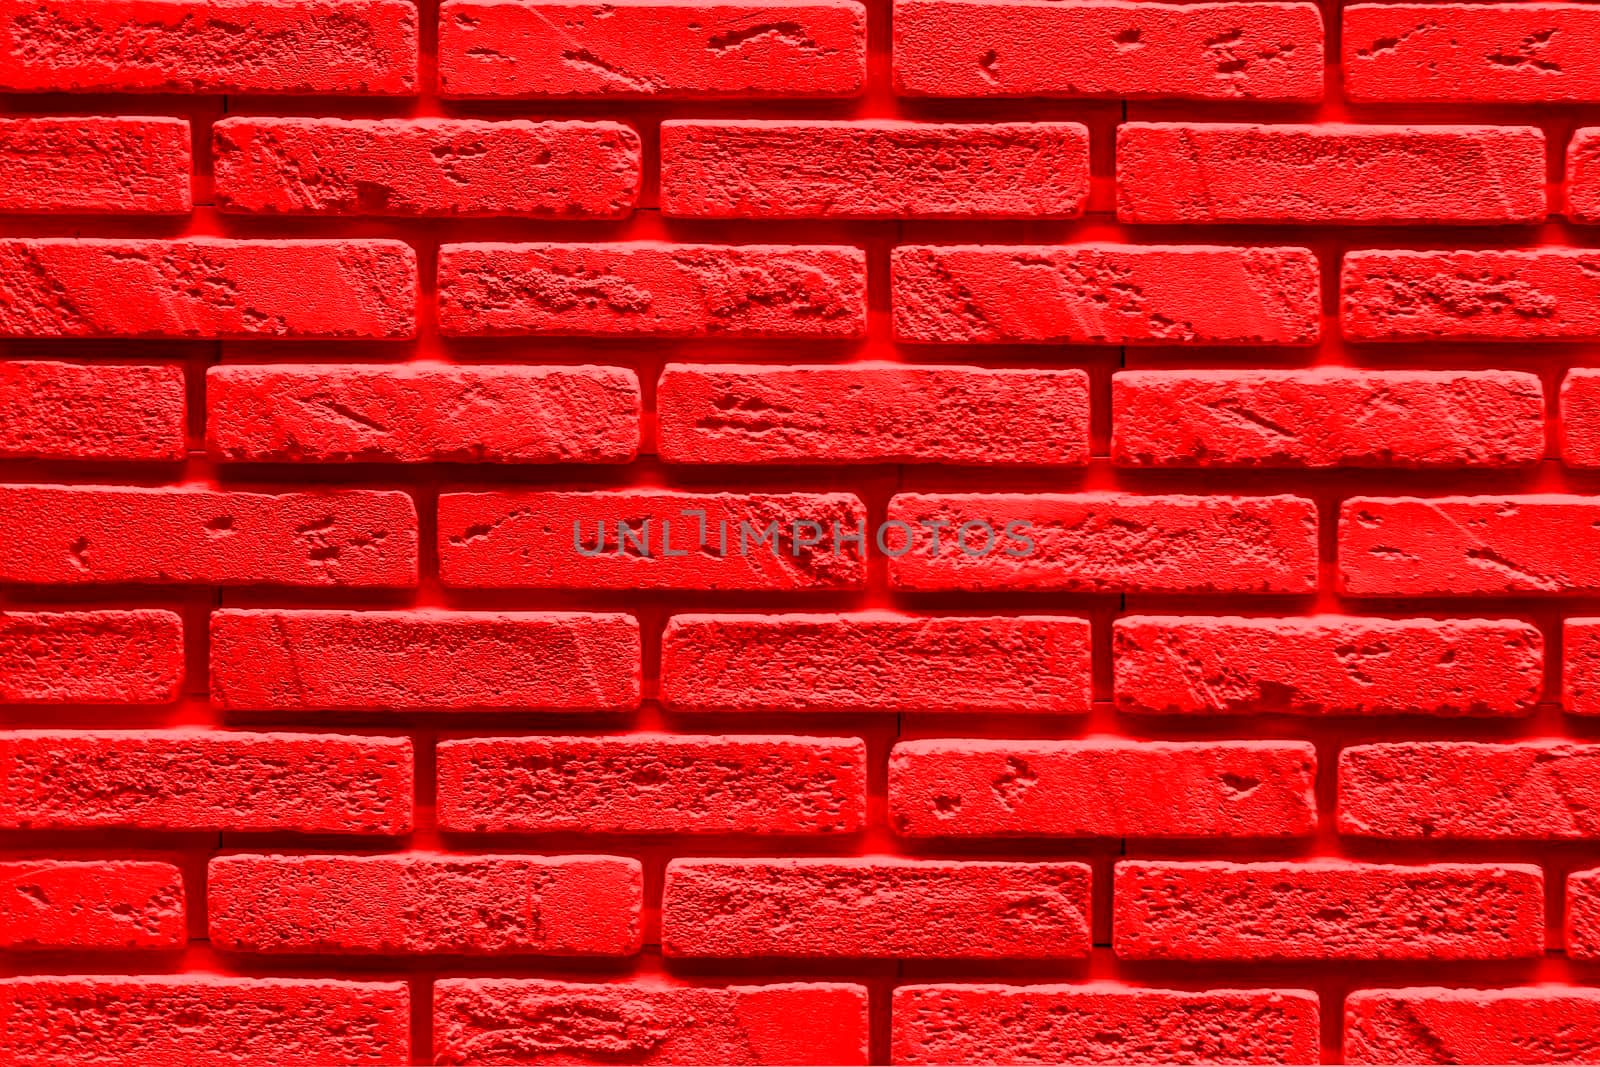 Red Background is made of artificial stone. Side view, indoors horizontal shot. by Essffes